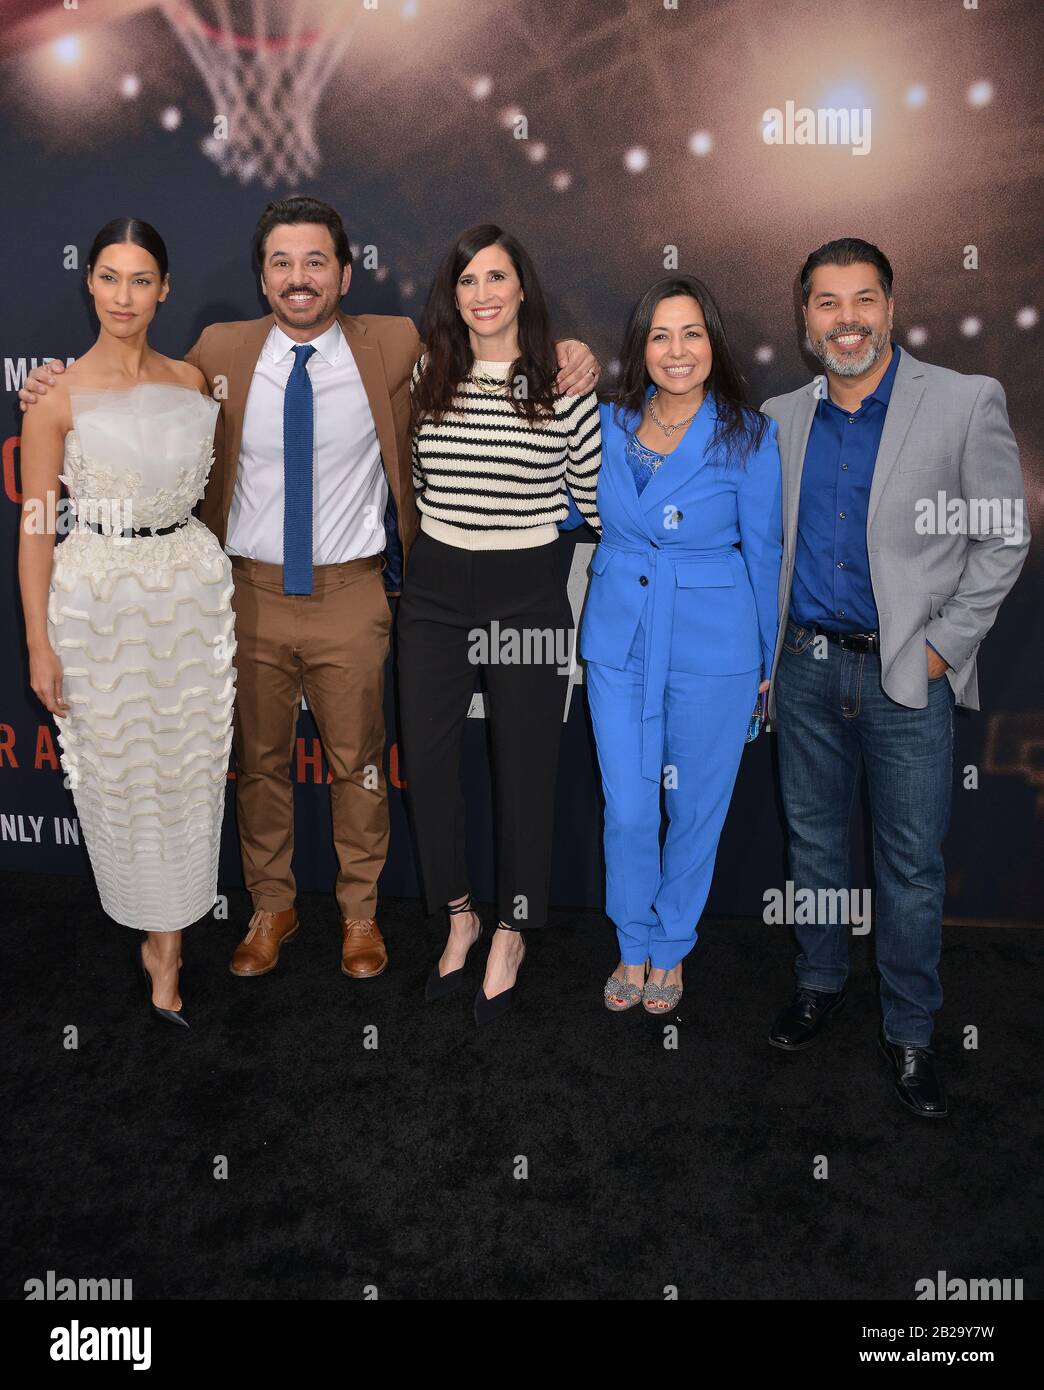 Los Angeles, USA. 01st Mar, 2020. Janina Gavankar, Al Madrigal, Michaela Watkins, Yeniffer Behrens and Sal Velez Jr. 077 attend the premiere of Warner Bros Pictures' " The Way Back" at Regal LA Live on March 01, 2020 in Los Angeles, California. Credit: Tsuni/USA/Alamy Live News Stock Photo